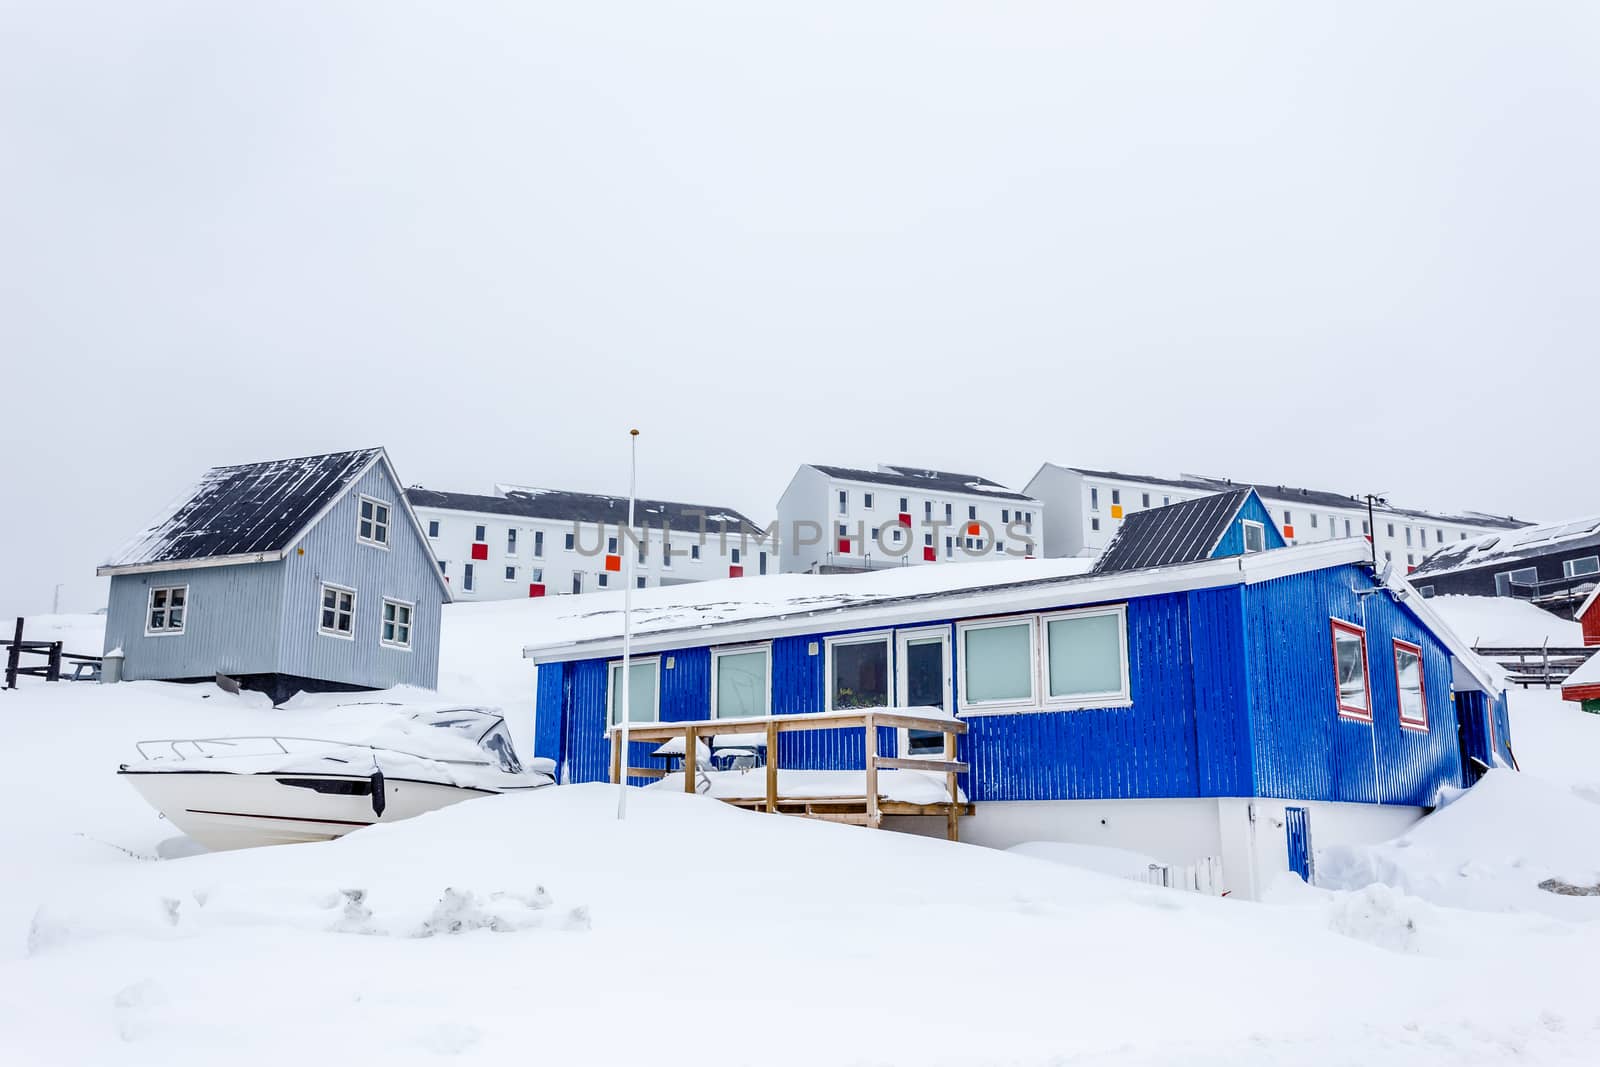 Greenlandic capital frozen buildings and streets full of snow,Nu by ambeon